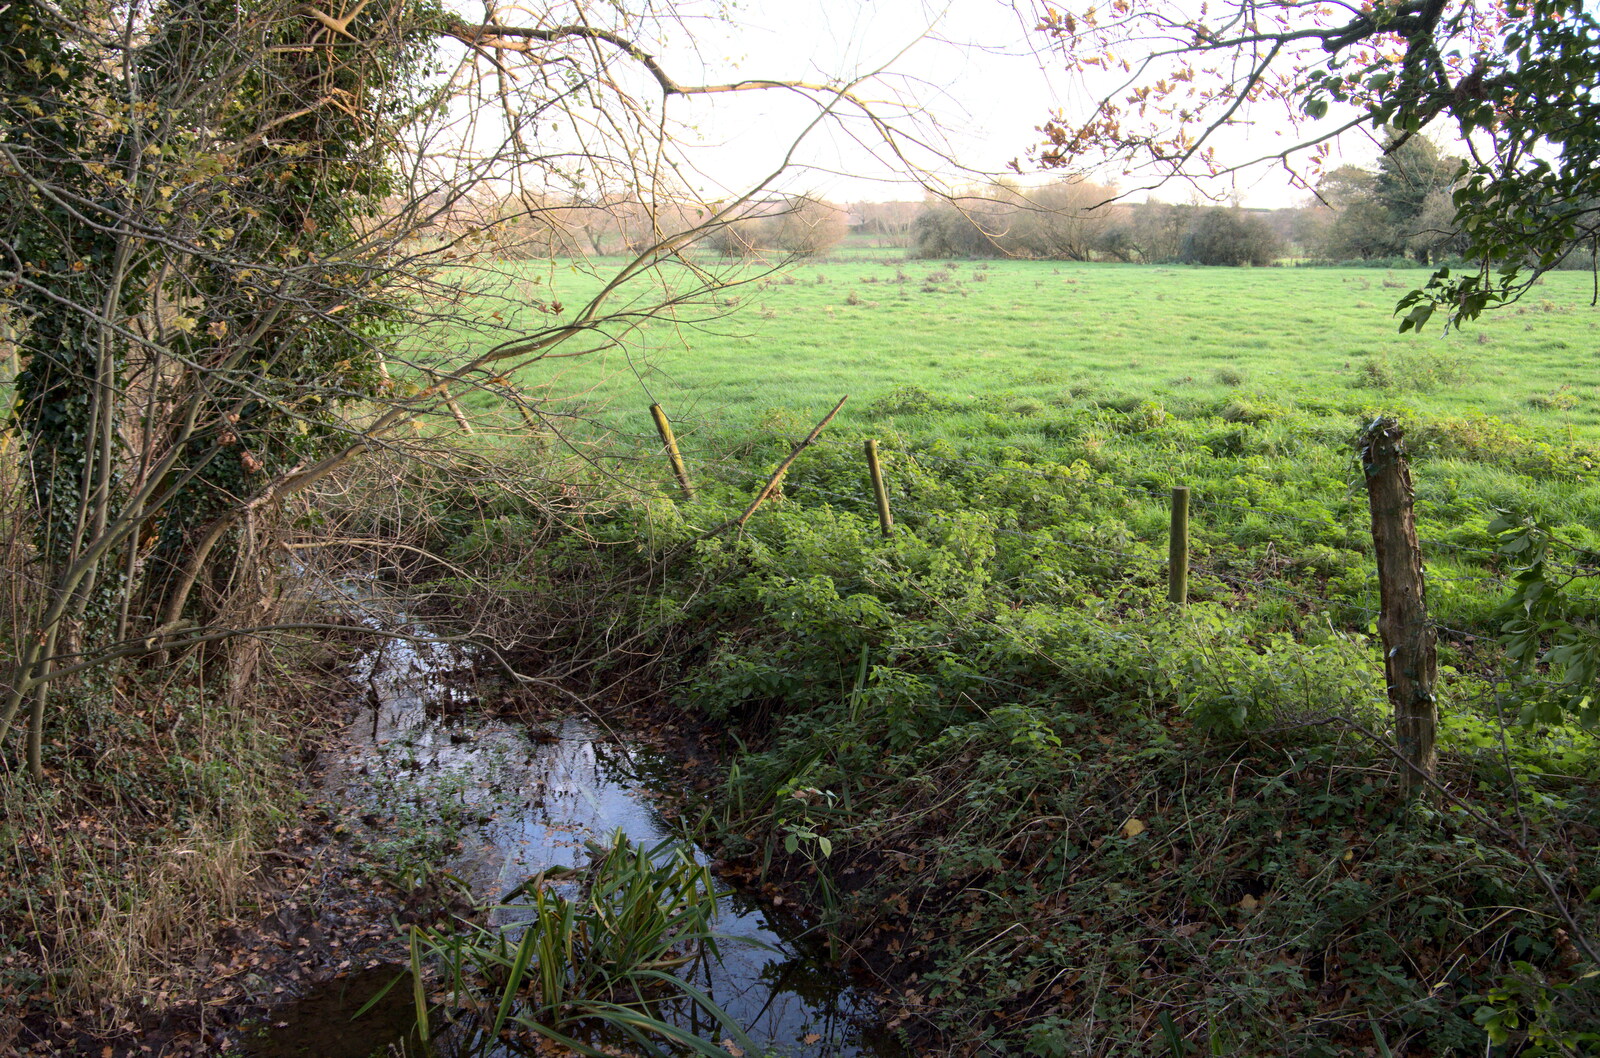 A little stream from The Dereliction of Eye, Suffolk - 22nd November 2020